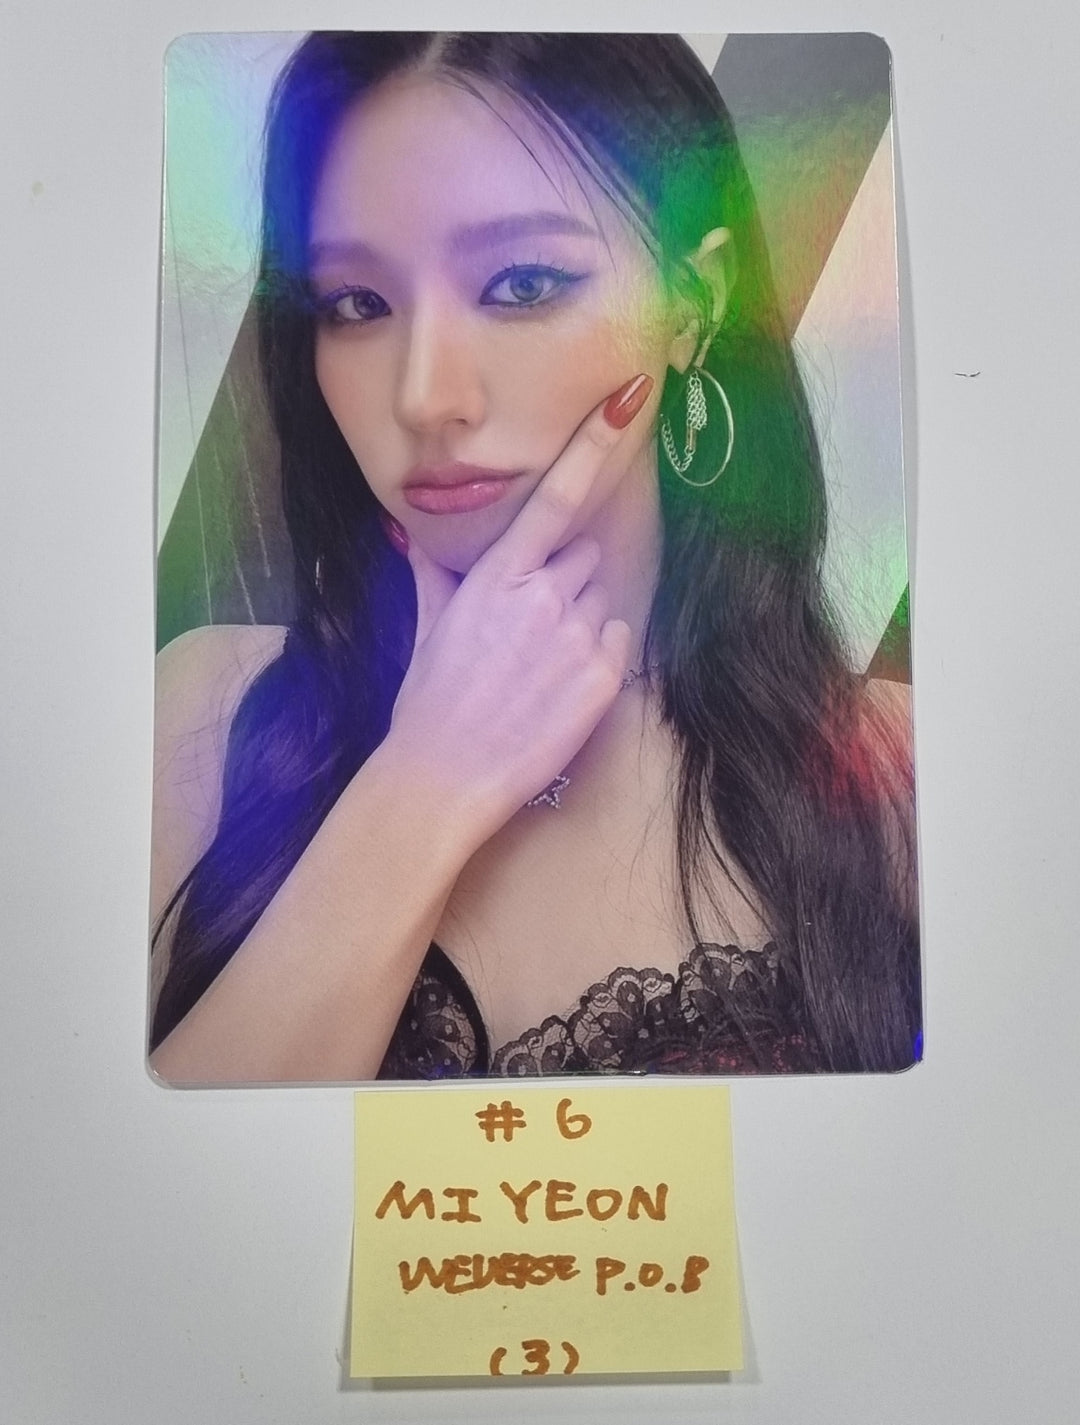 (g) I-DLE "I Feel" - Weverse Shop Pre-Order Benefit Photocard, Stand Photo, Lenticular Photo [Restocked 5/18]